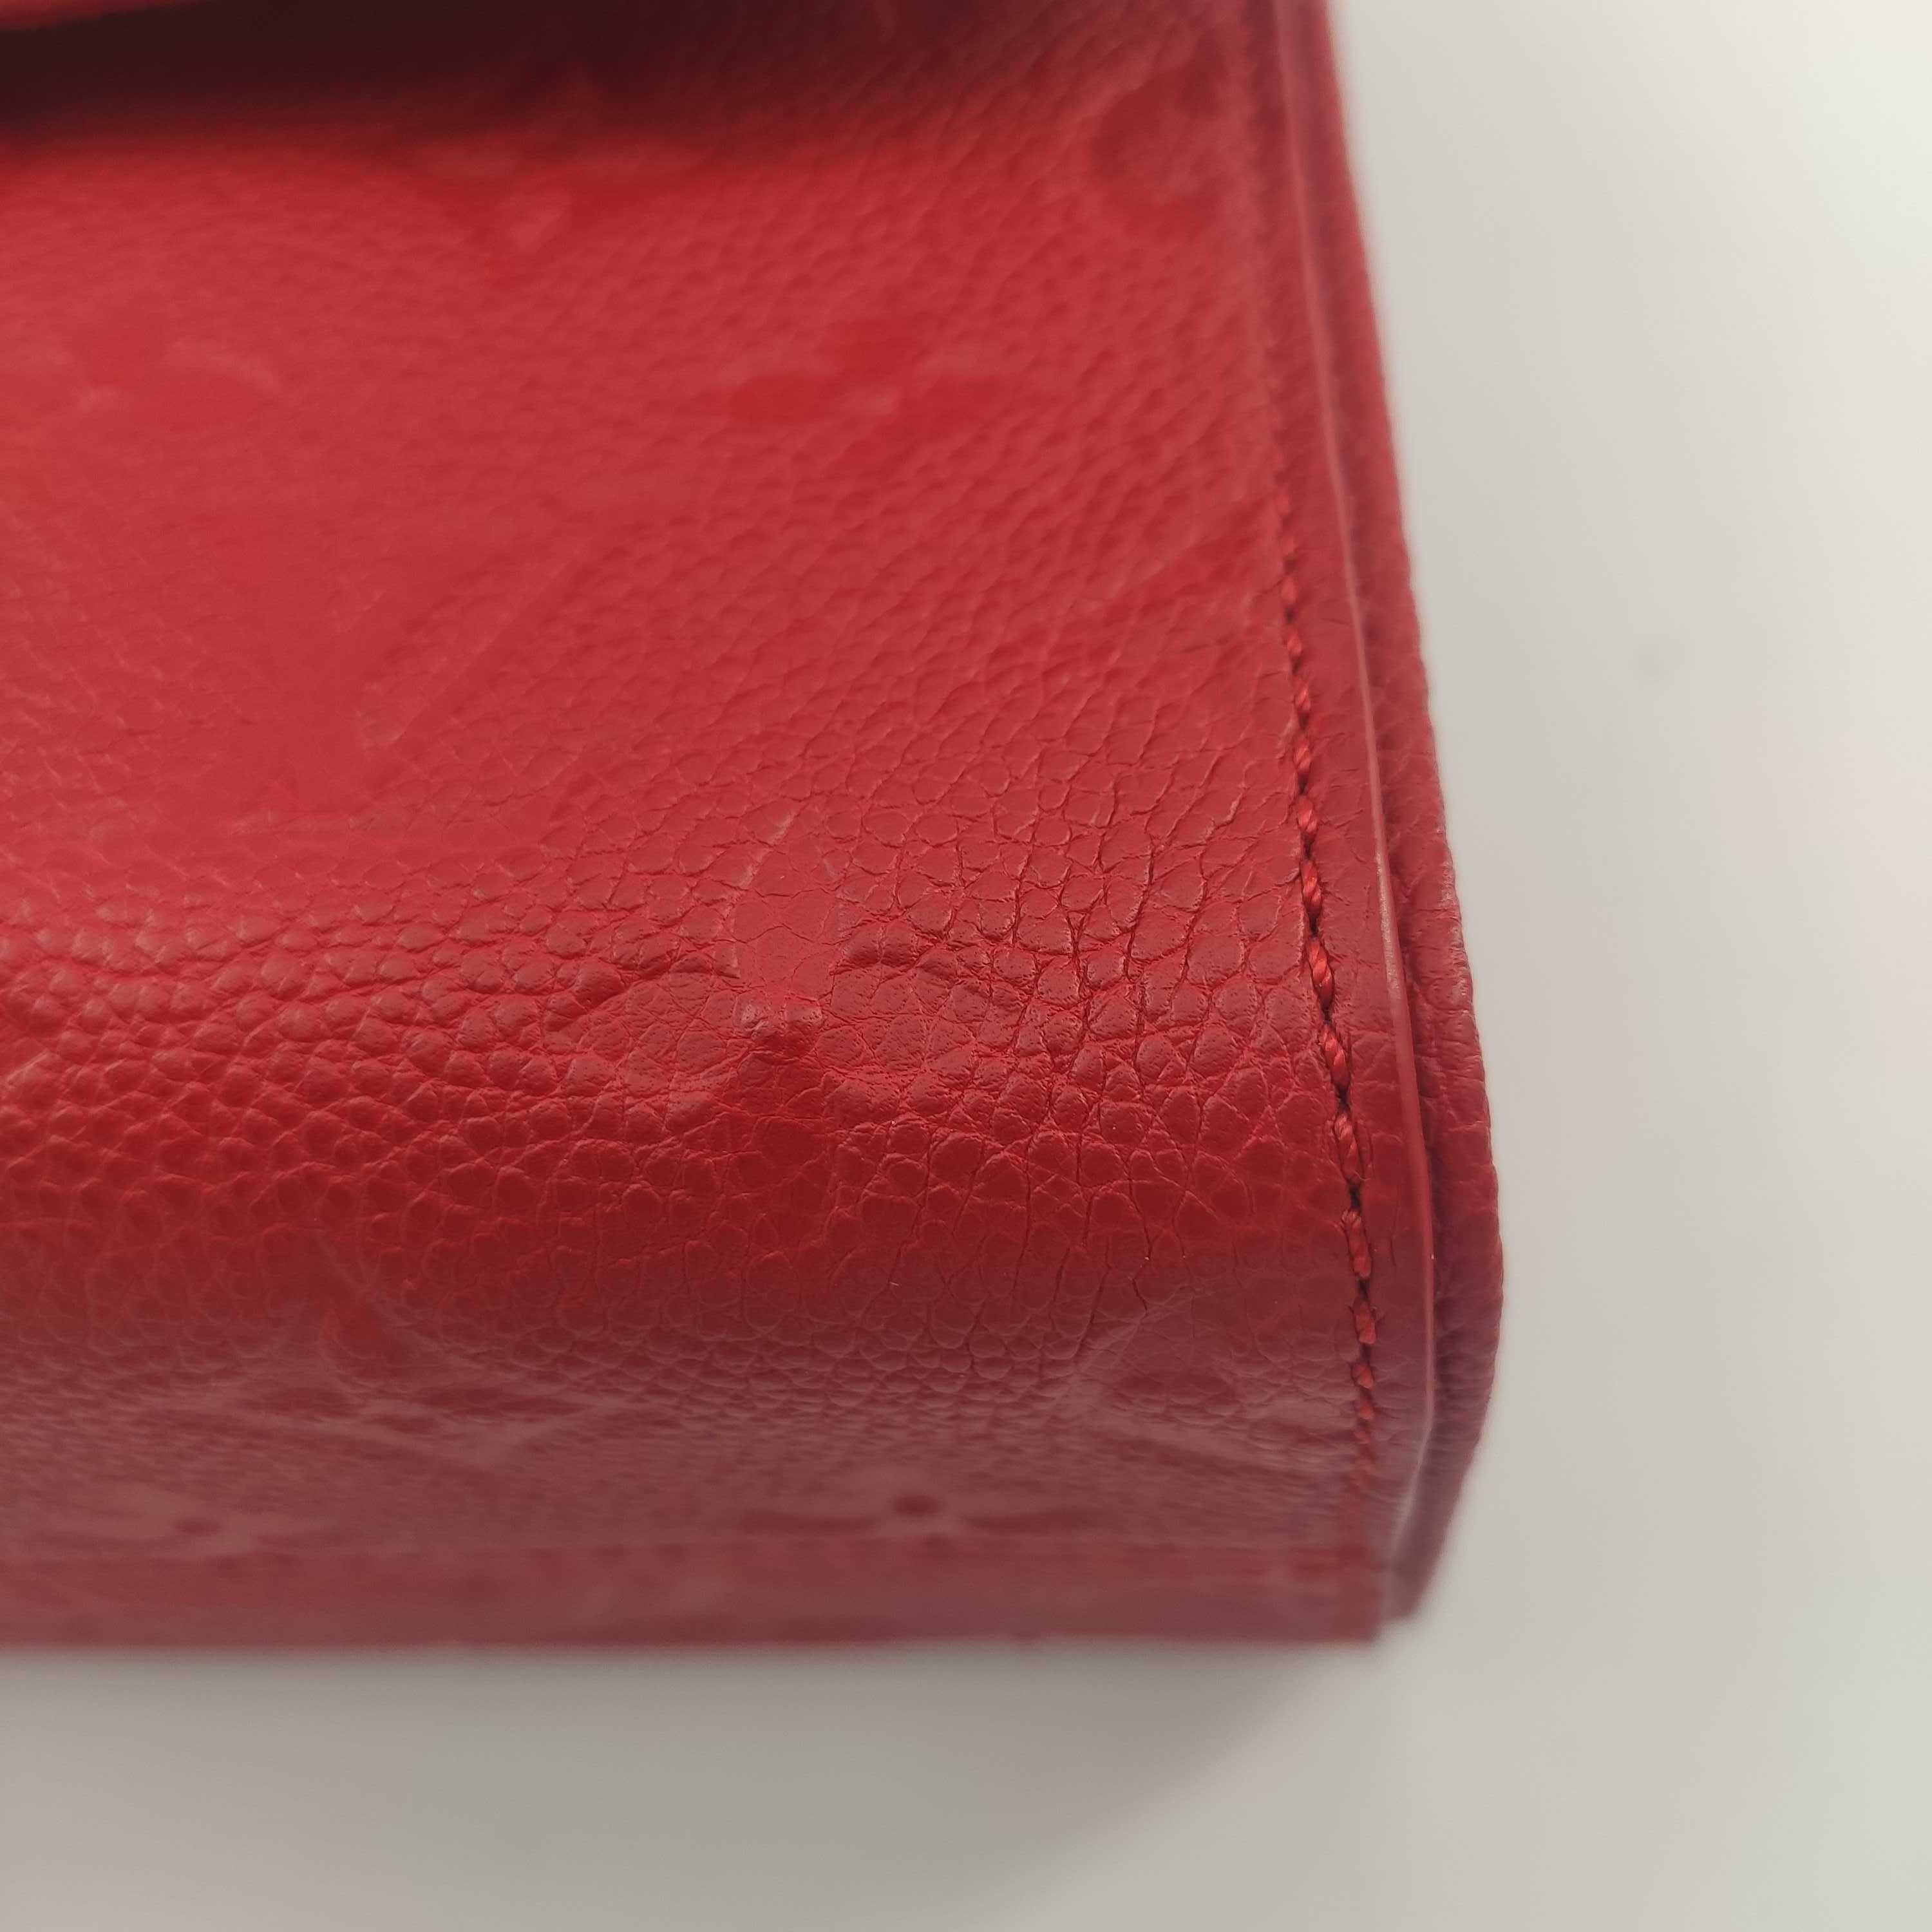 LOUIS VUITTON Saint Sulpice Shoulder bag in Red Leather 4